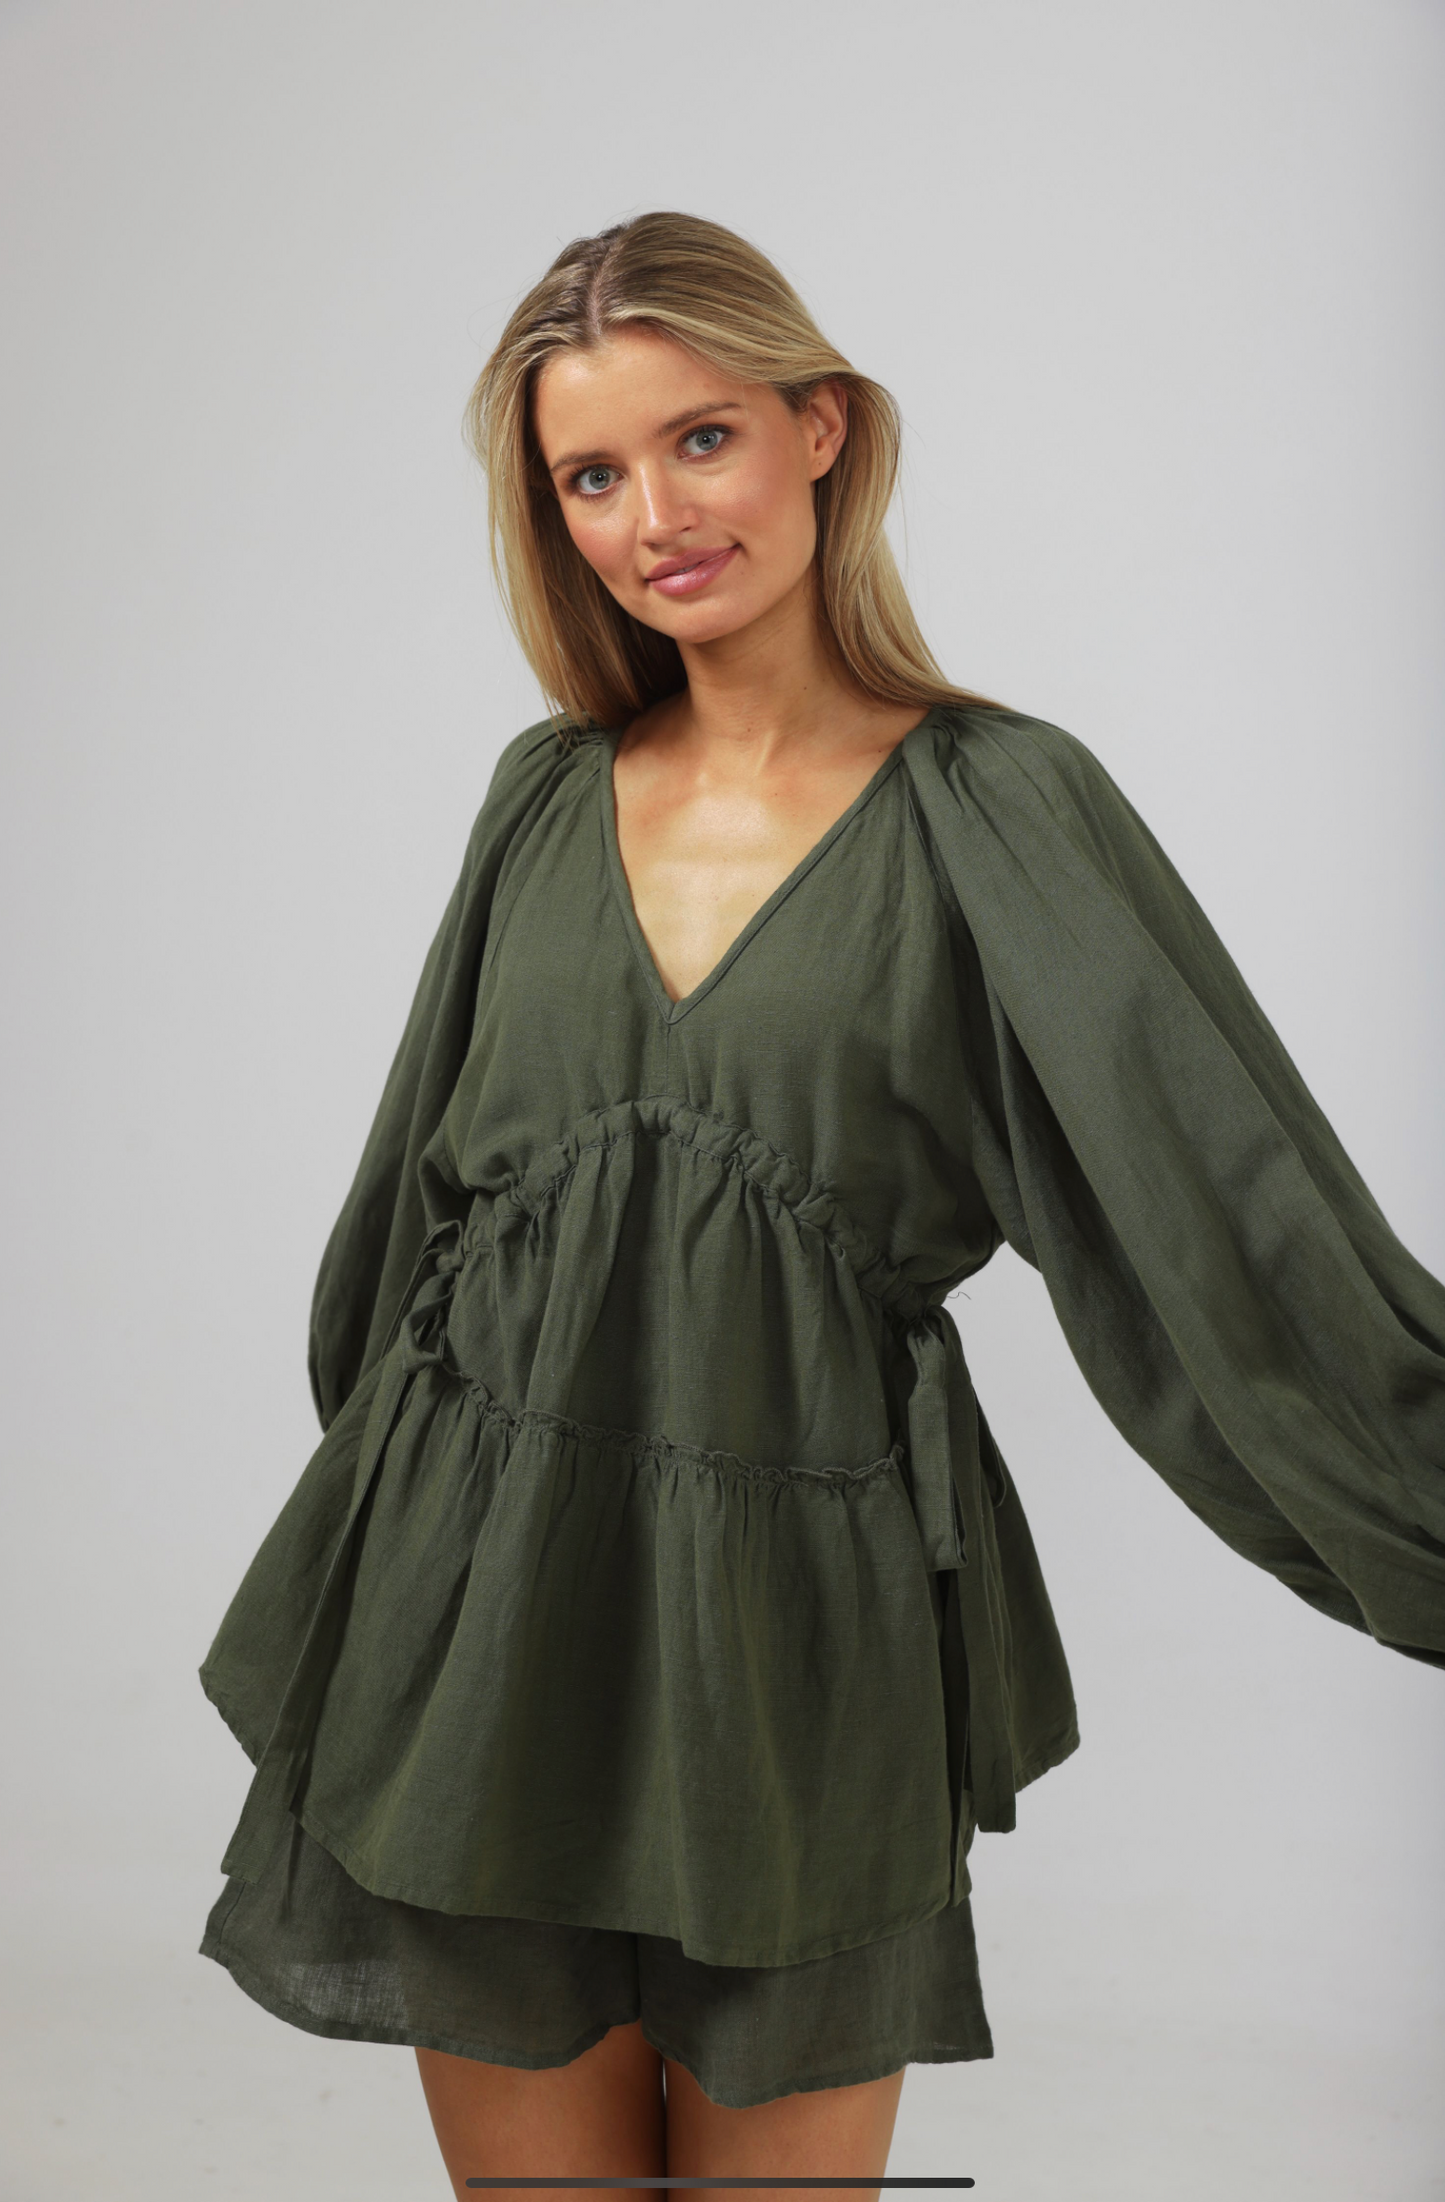 Shanty wing on a Prayer Top - Forest Green